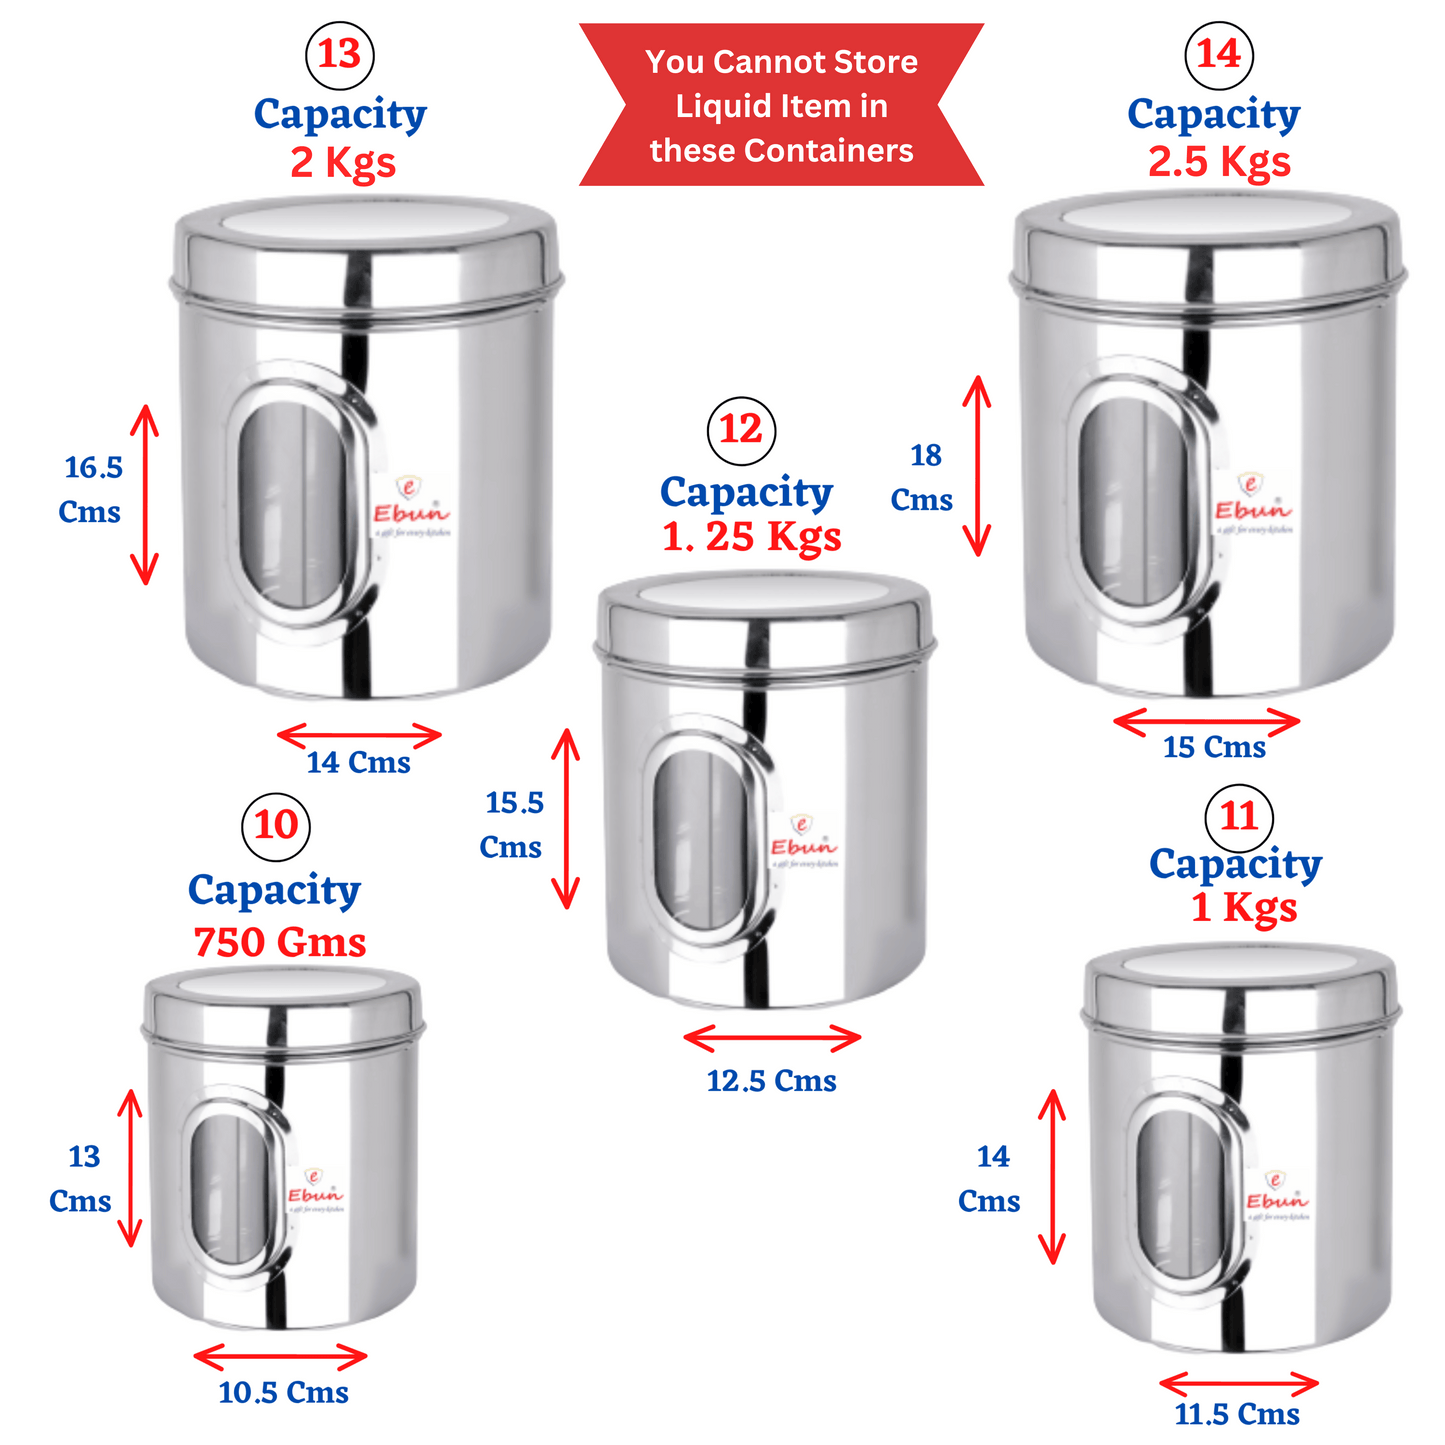 Ebun Stainless Steel See Through Containers Combo Set - 200 Gms to 2.5 kgs Capacity